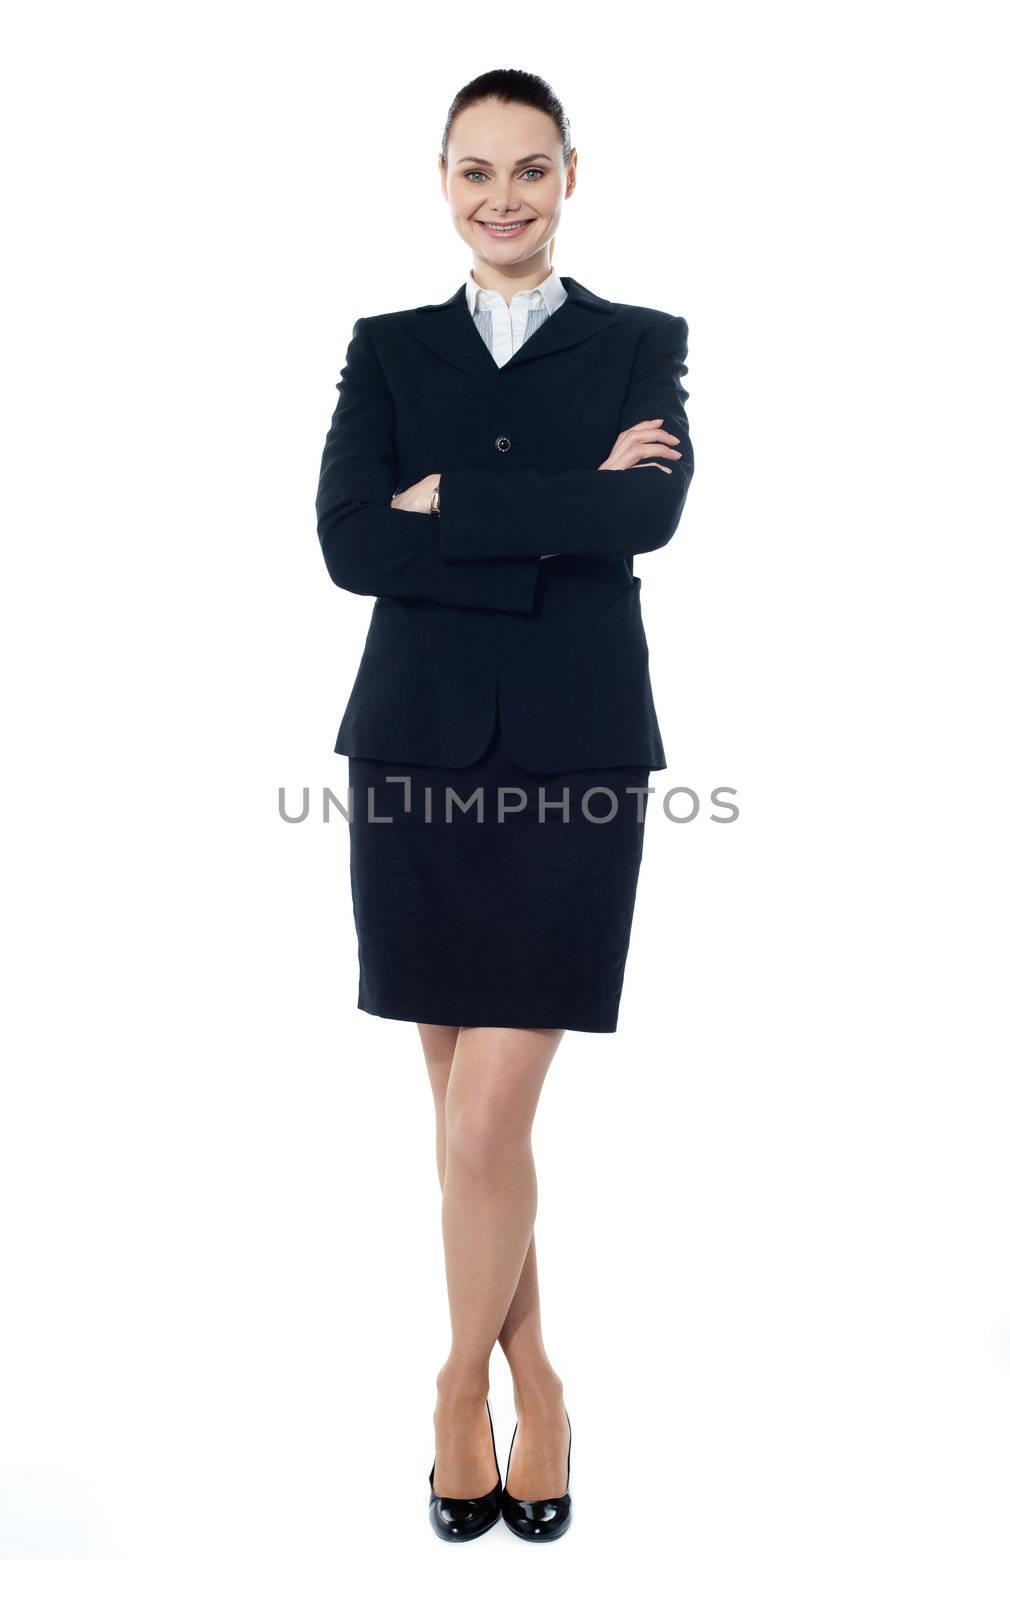 Successful young businesswoman, portrait by stockyimages